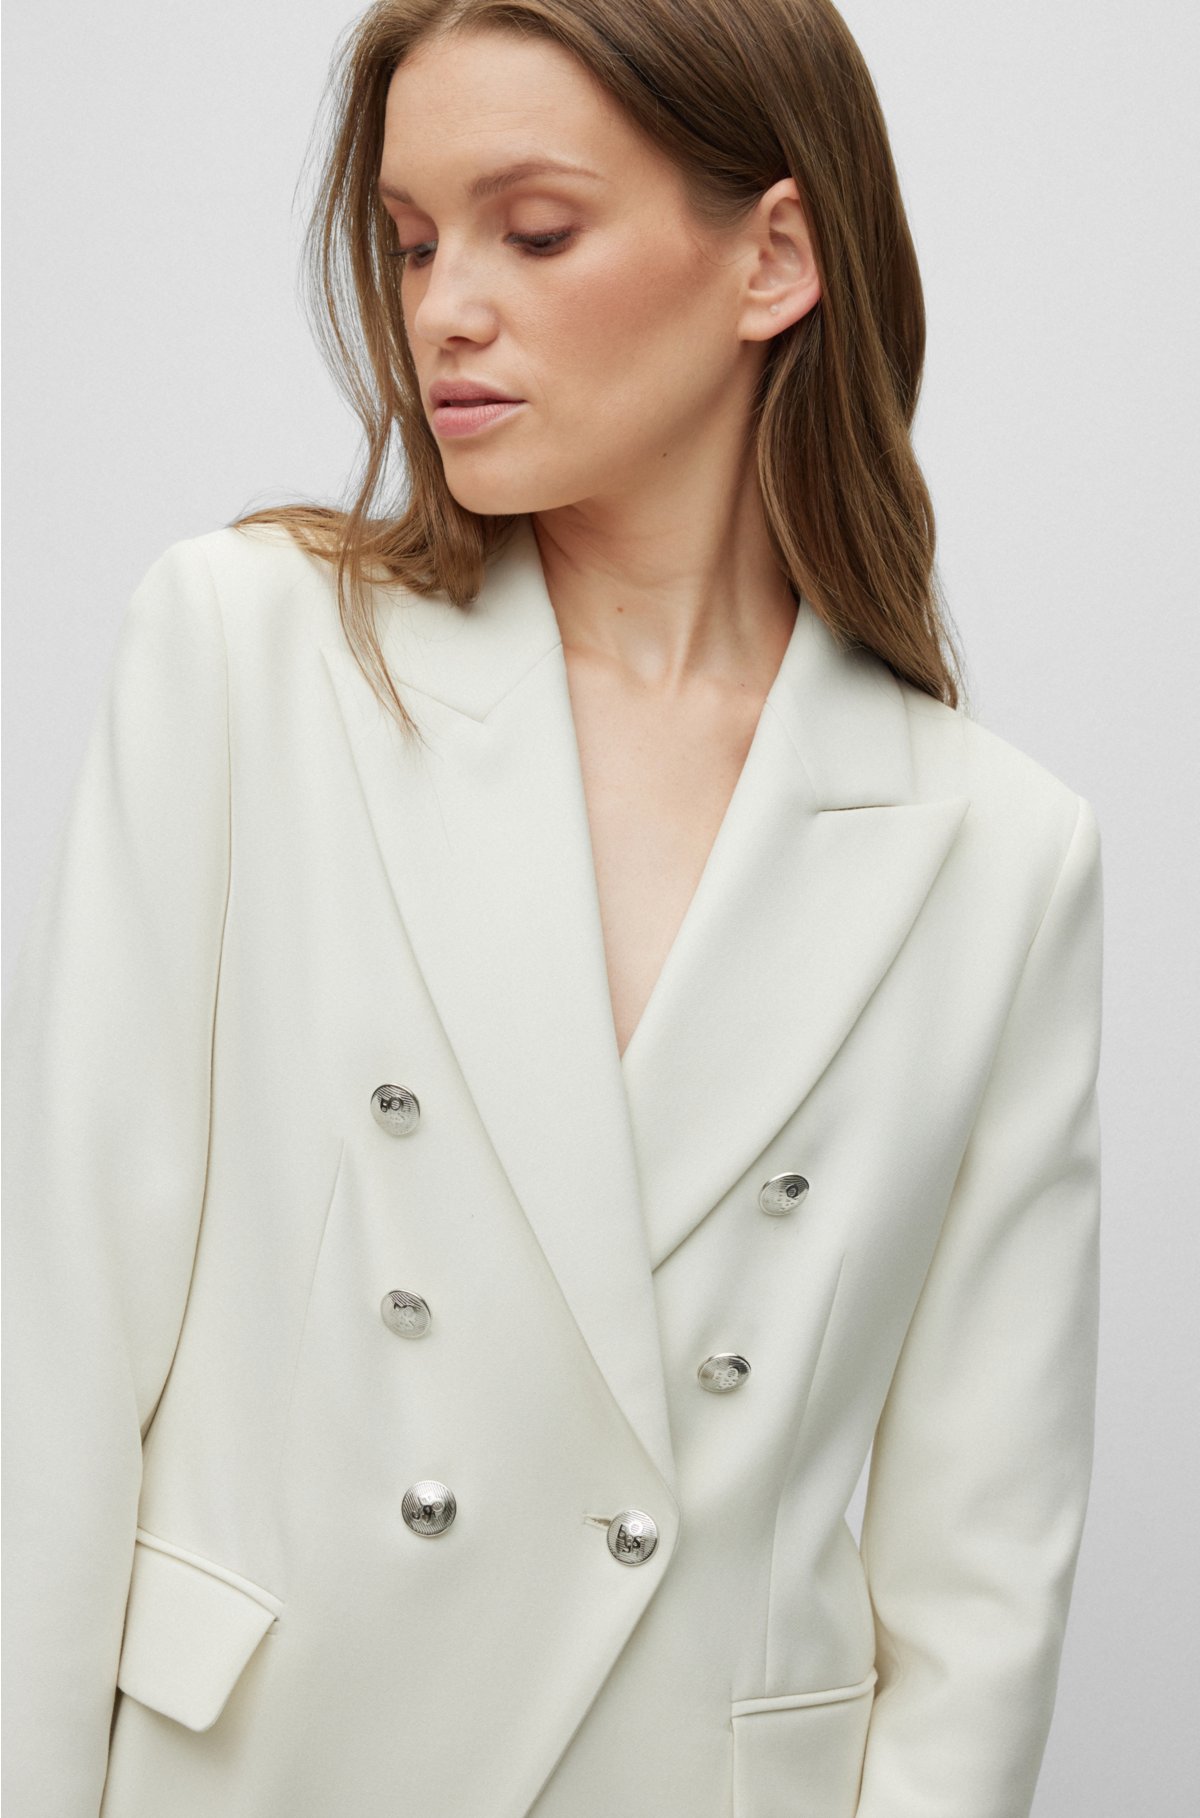 BOSS - Slim-fit jacket with double-breasted closure